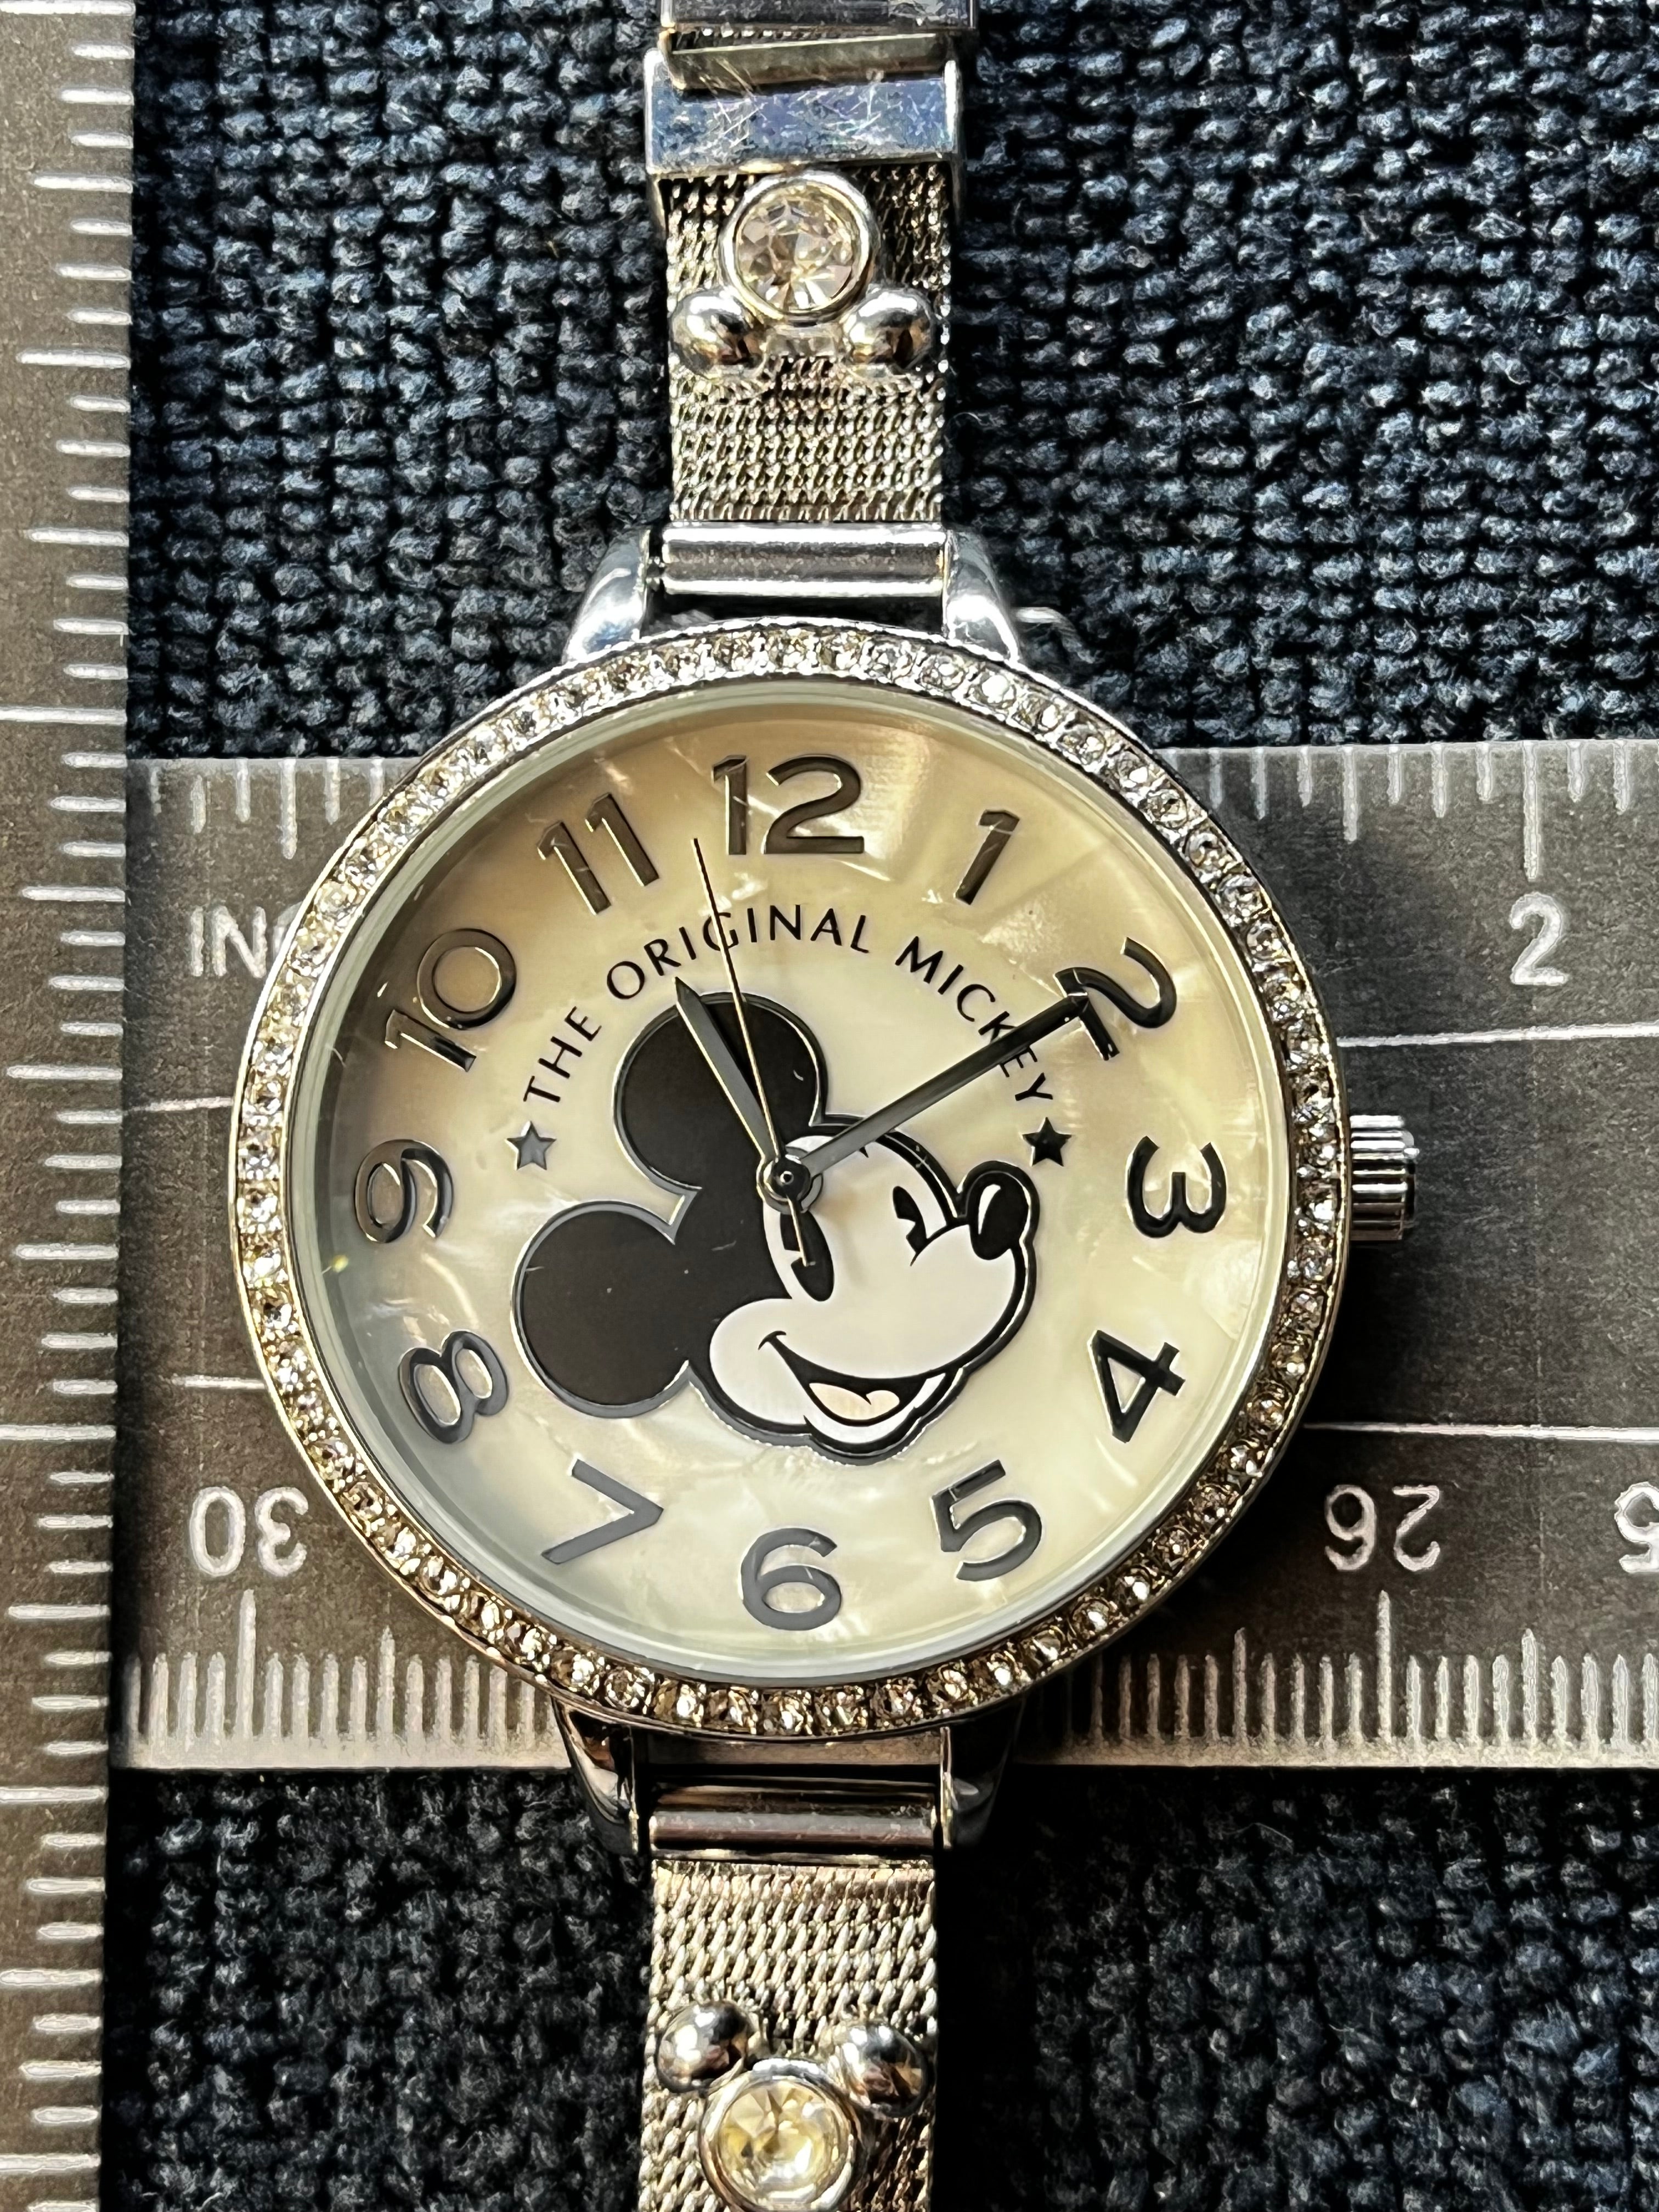 Seiko launches limited-edition products to commemorate Disney′s 100th  anniversary | News | Seiko Group Corporation